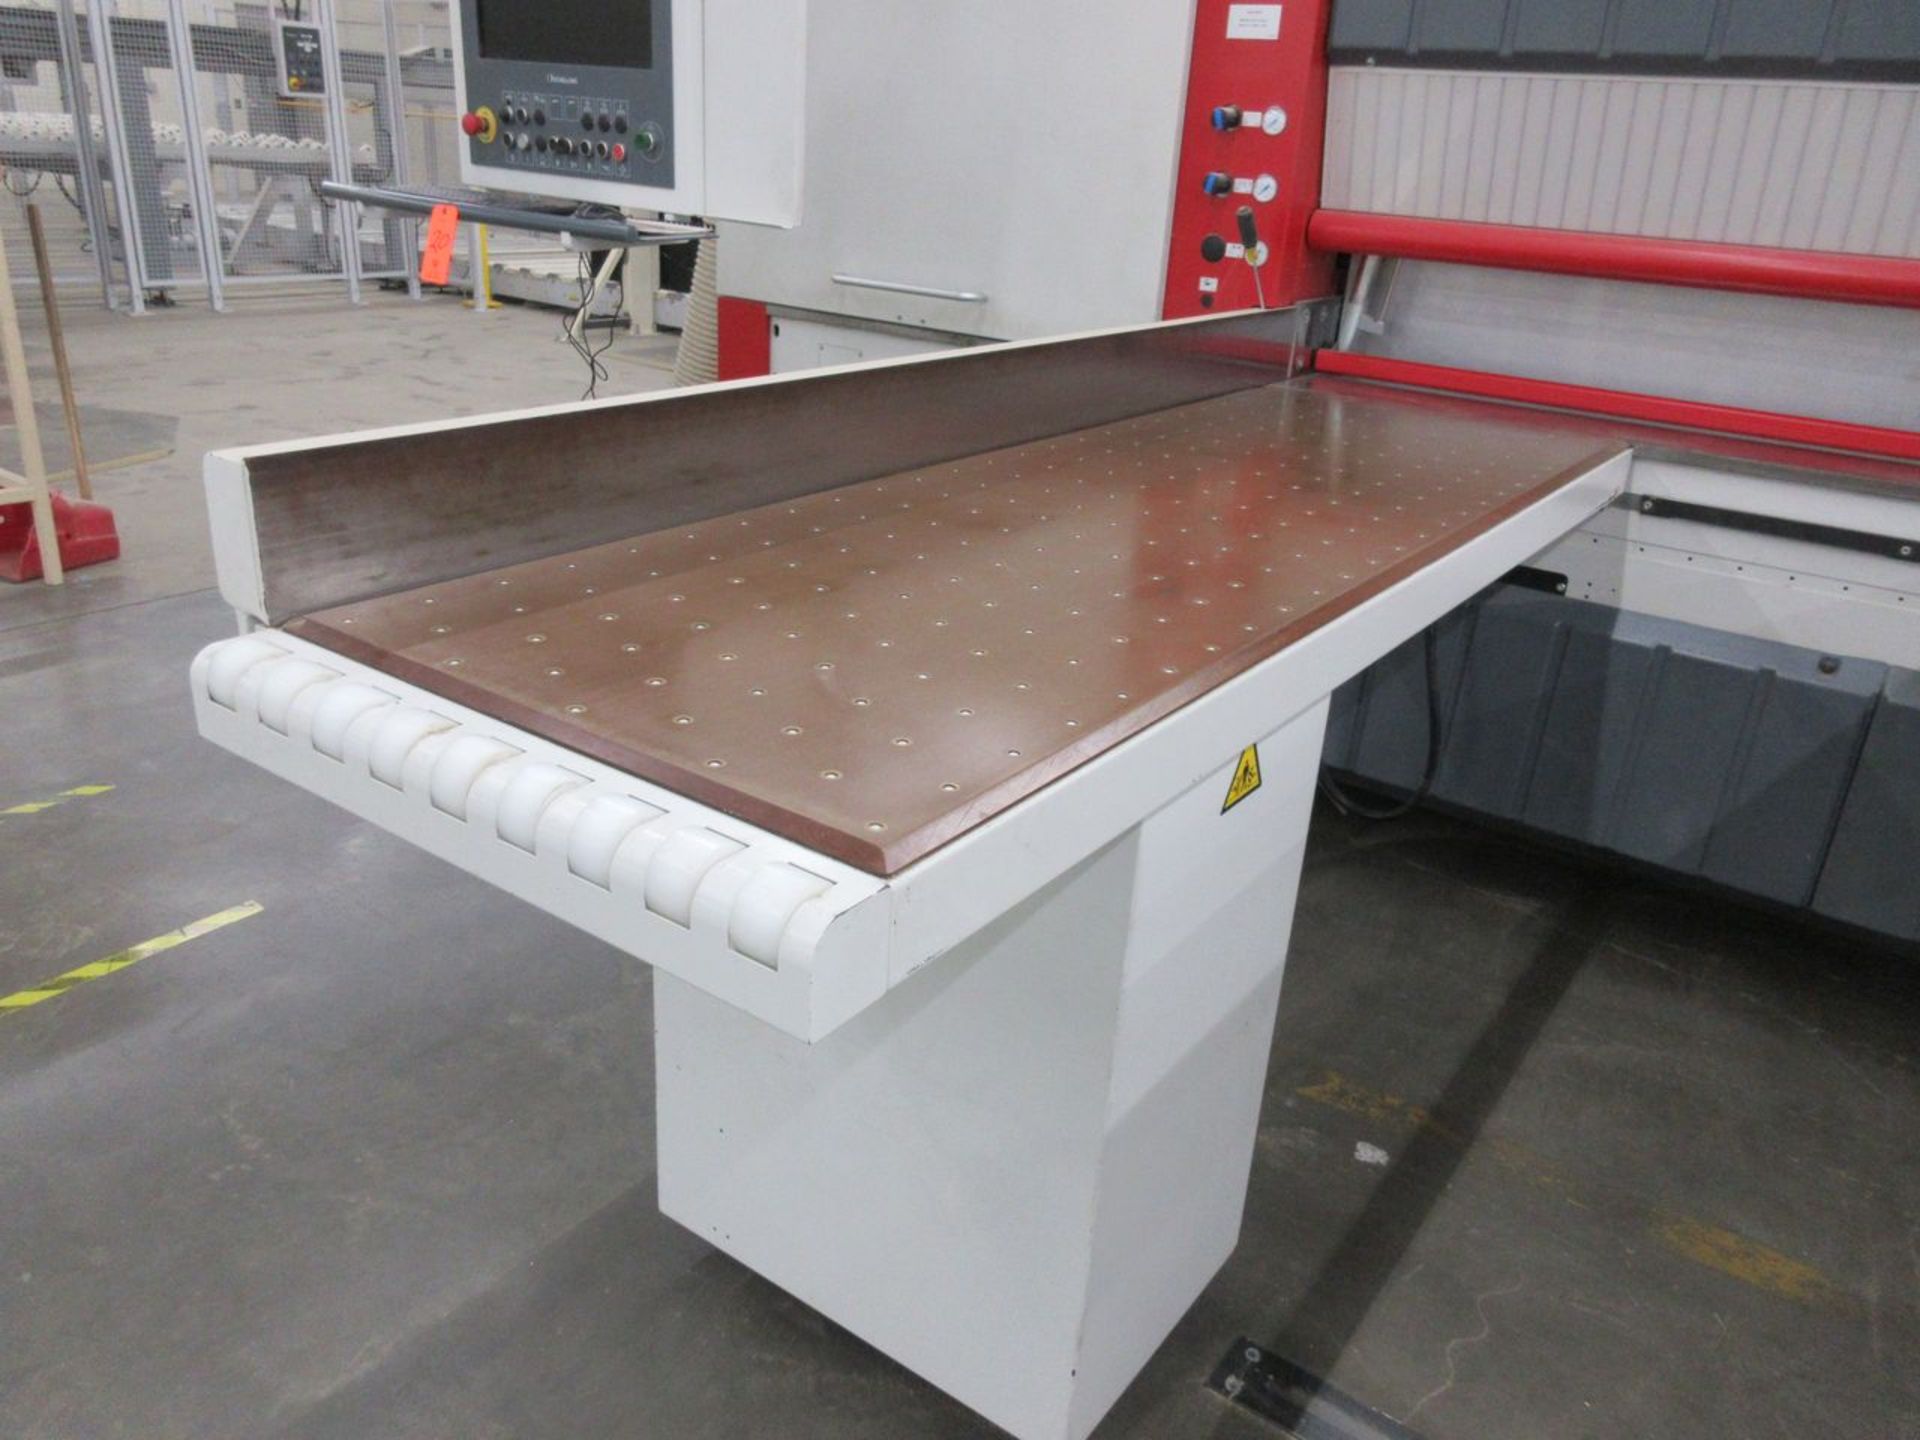 Schelling 14 ft. Model FH 6 430 CNC Rear Loading Horizontal Automatic Cut-to-Size Panel Saw, S/N: - Image 9 of 22